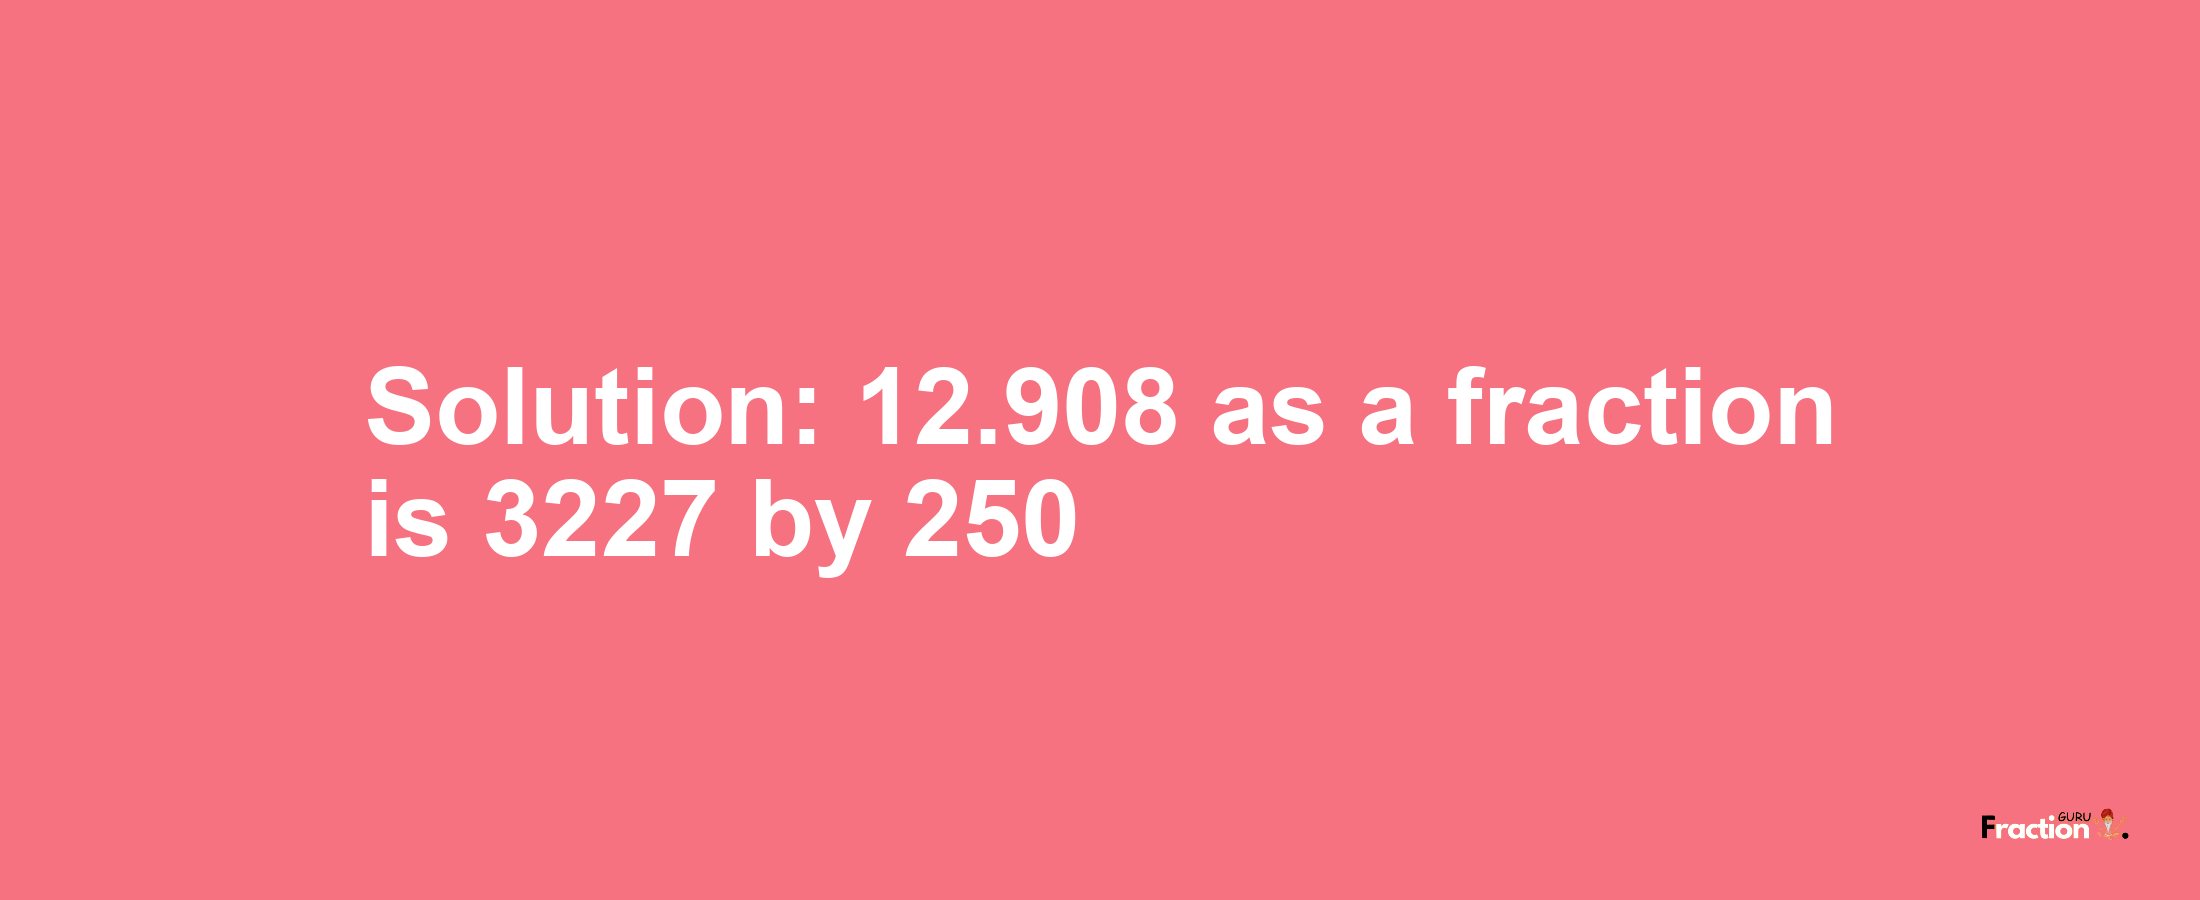 Solution:12.908 as a fraction is 3227/250